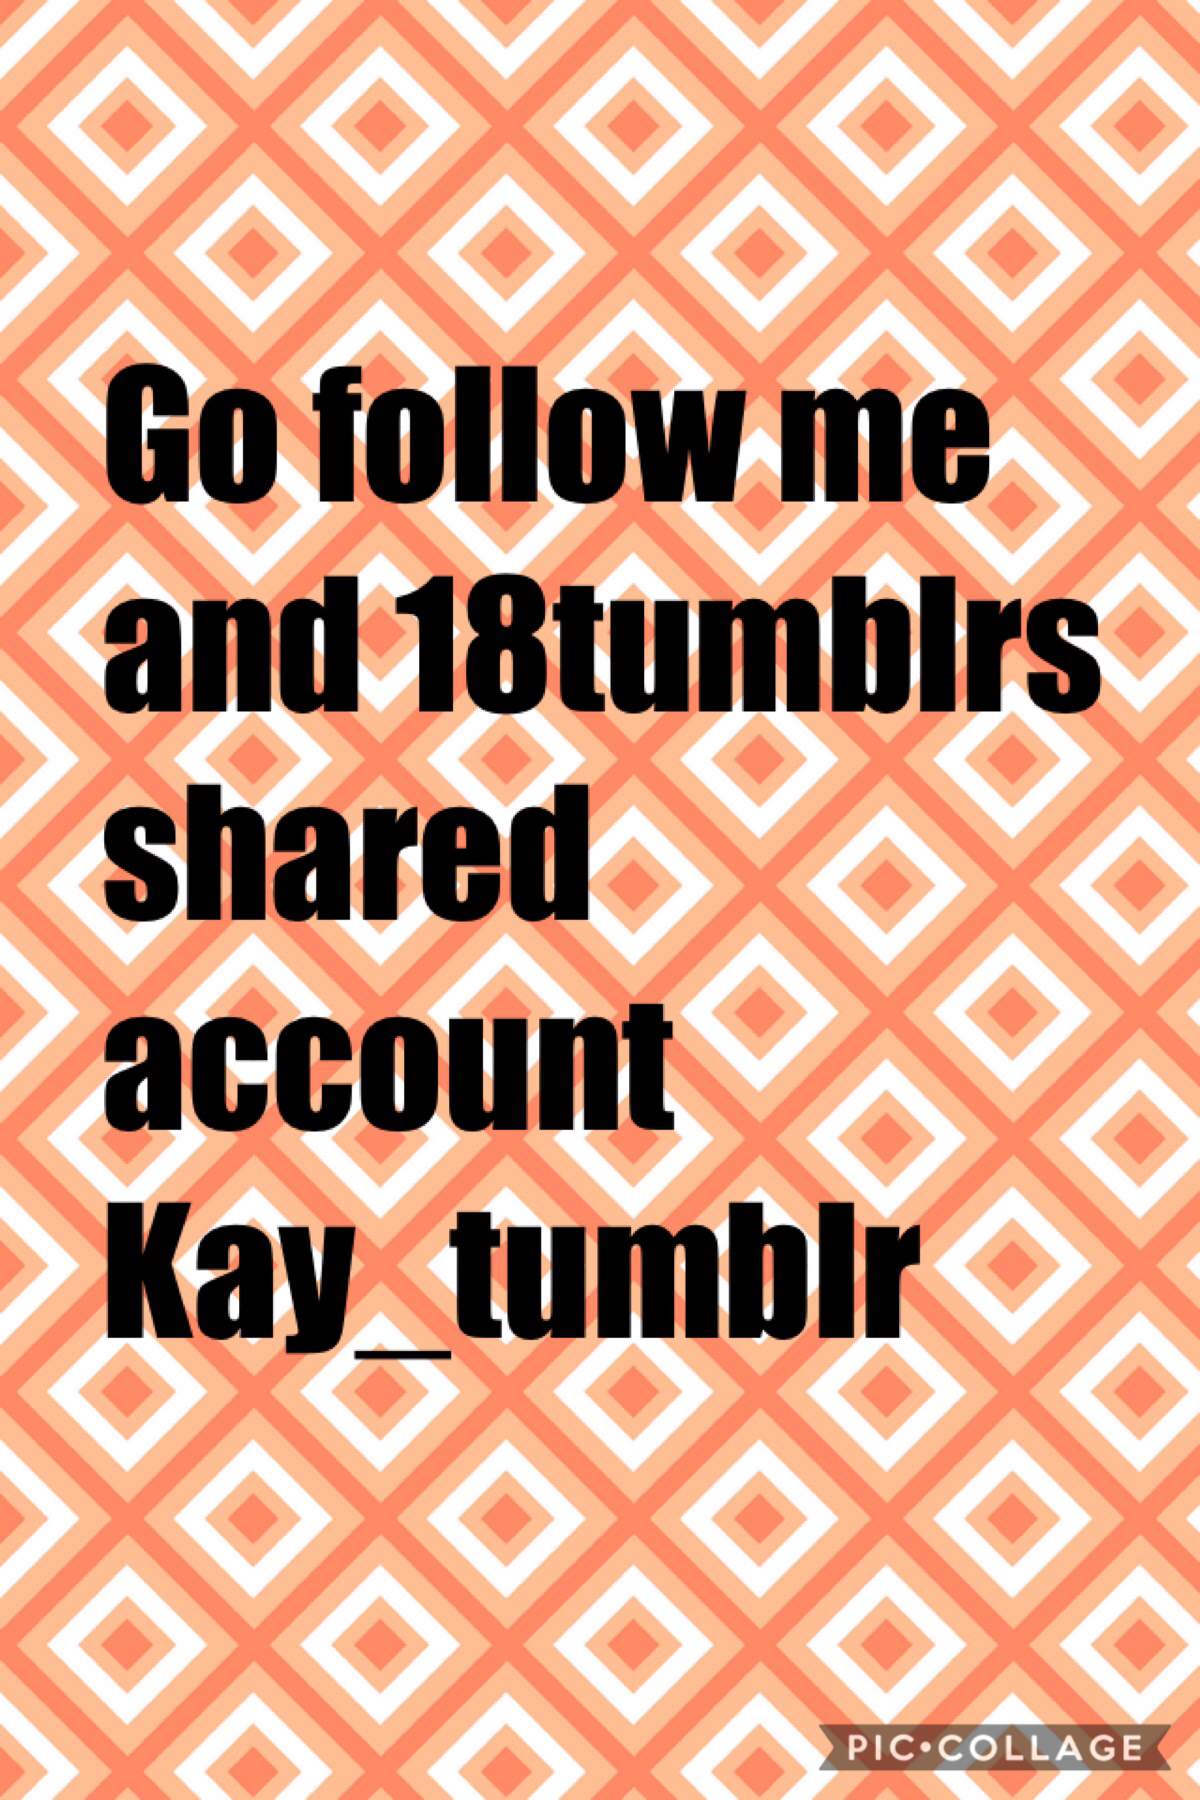 Go follow it and don't forget to also follow 18tumblr she's so sweet and amazing 